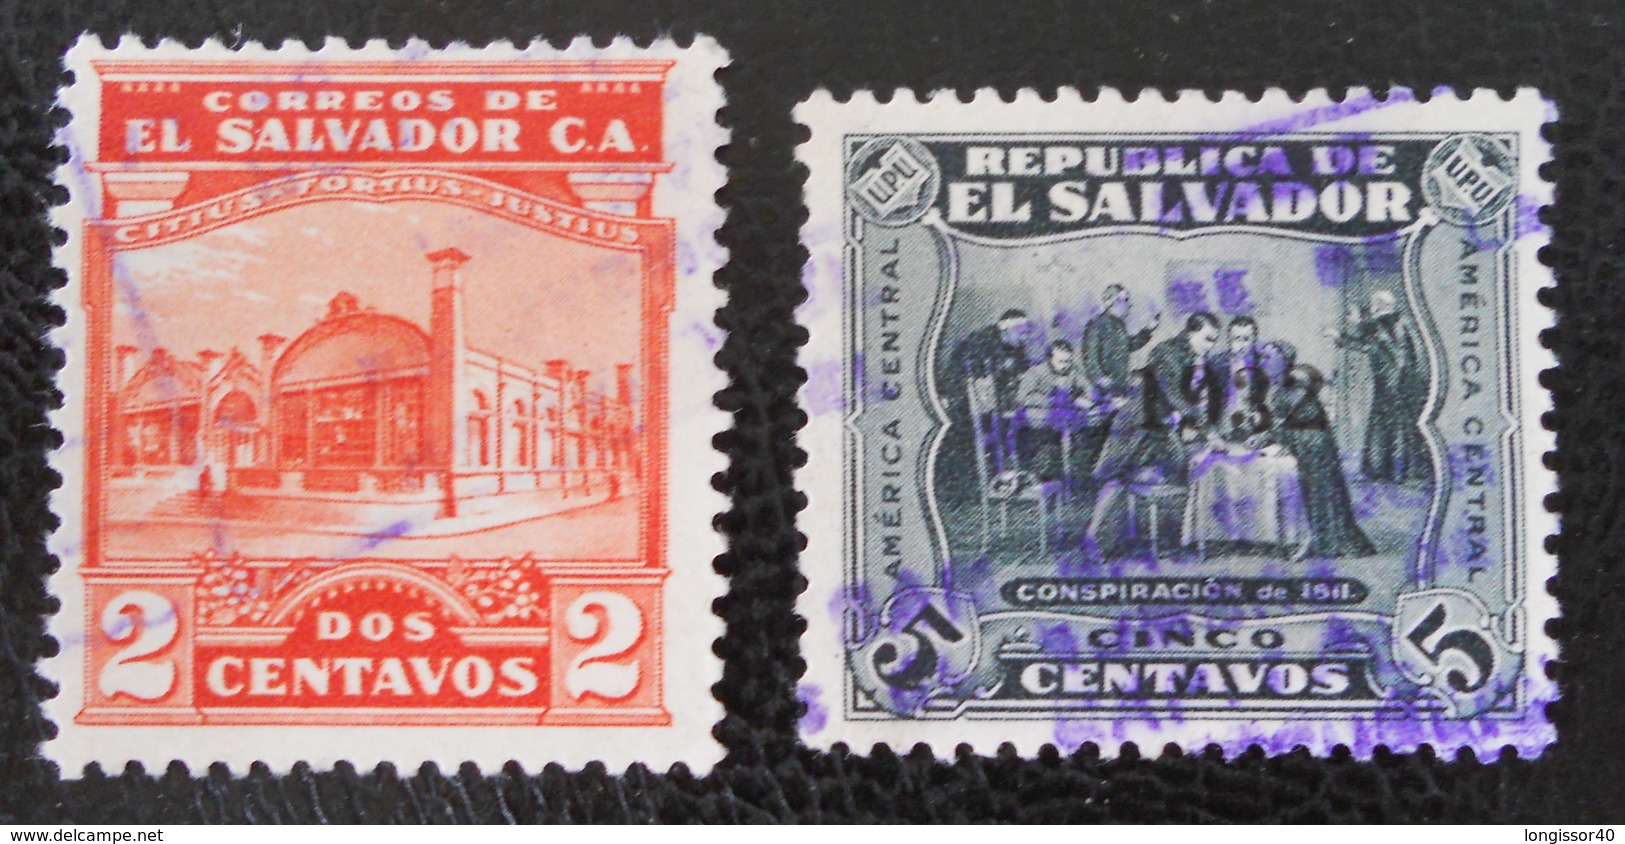 SERIE COURATE 1924/26 - OBLITERES - YT 450 + 452 - Salvador